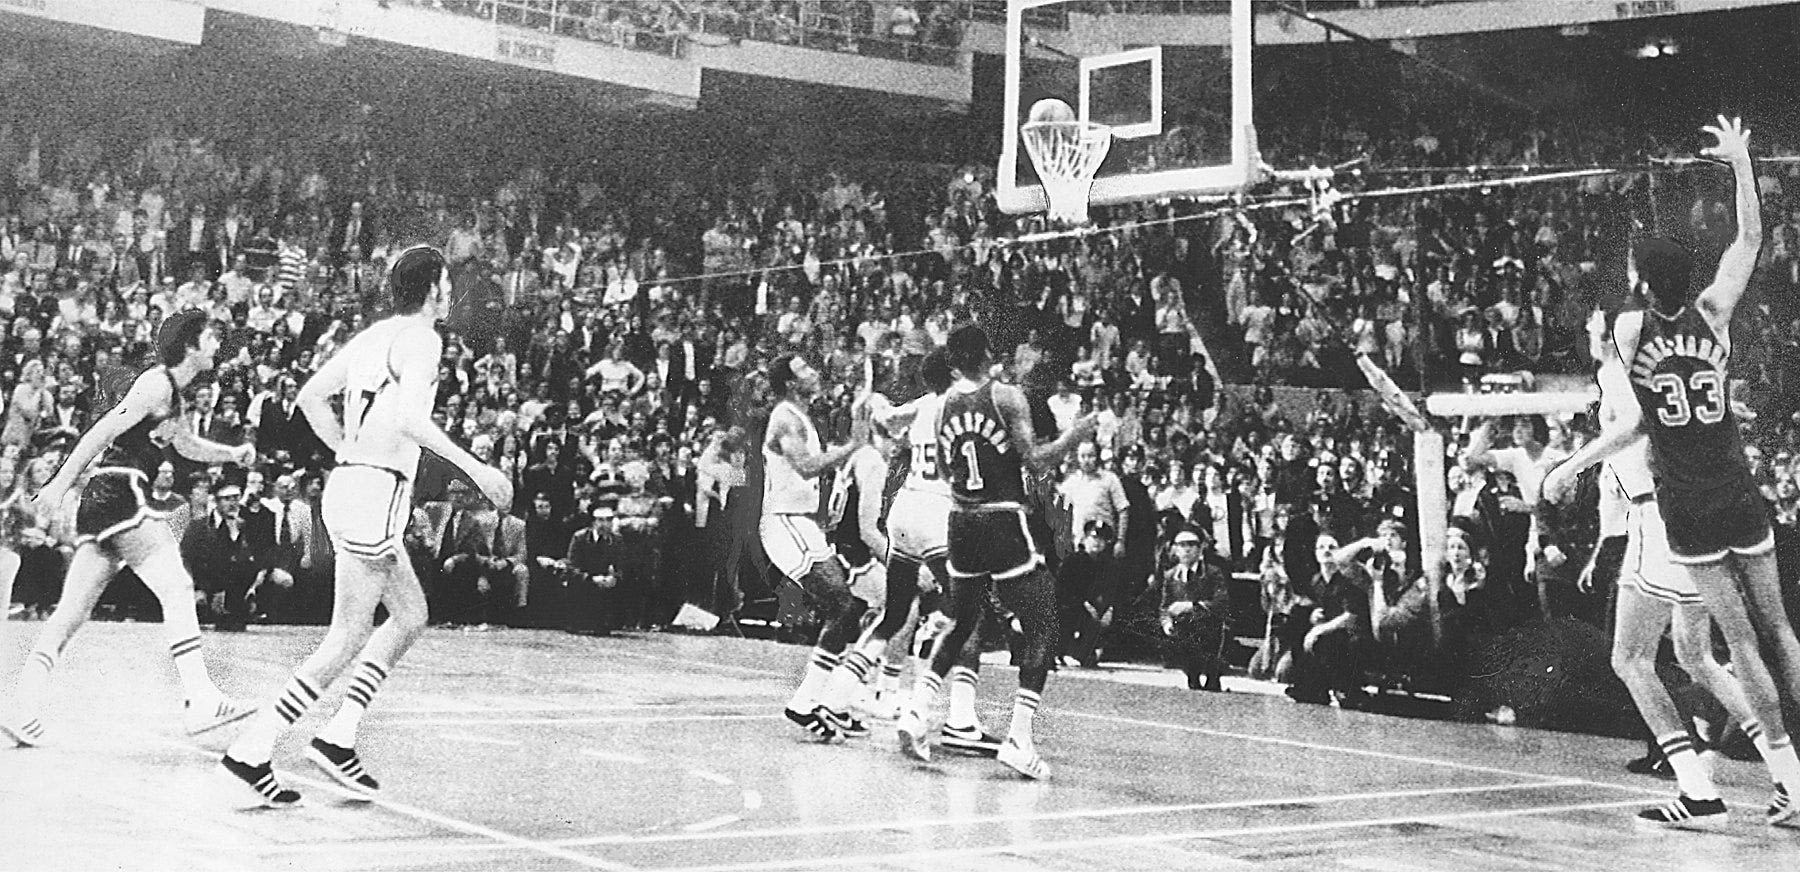 Fifty years ago, the NBA Finals began in Milwaukee, and the Celtics got the last laugh